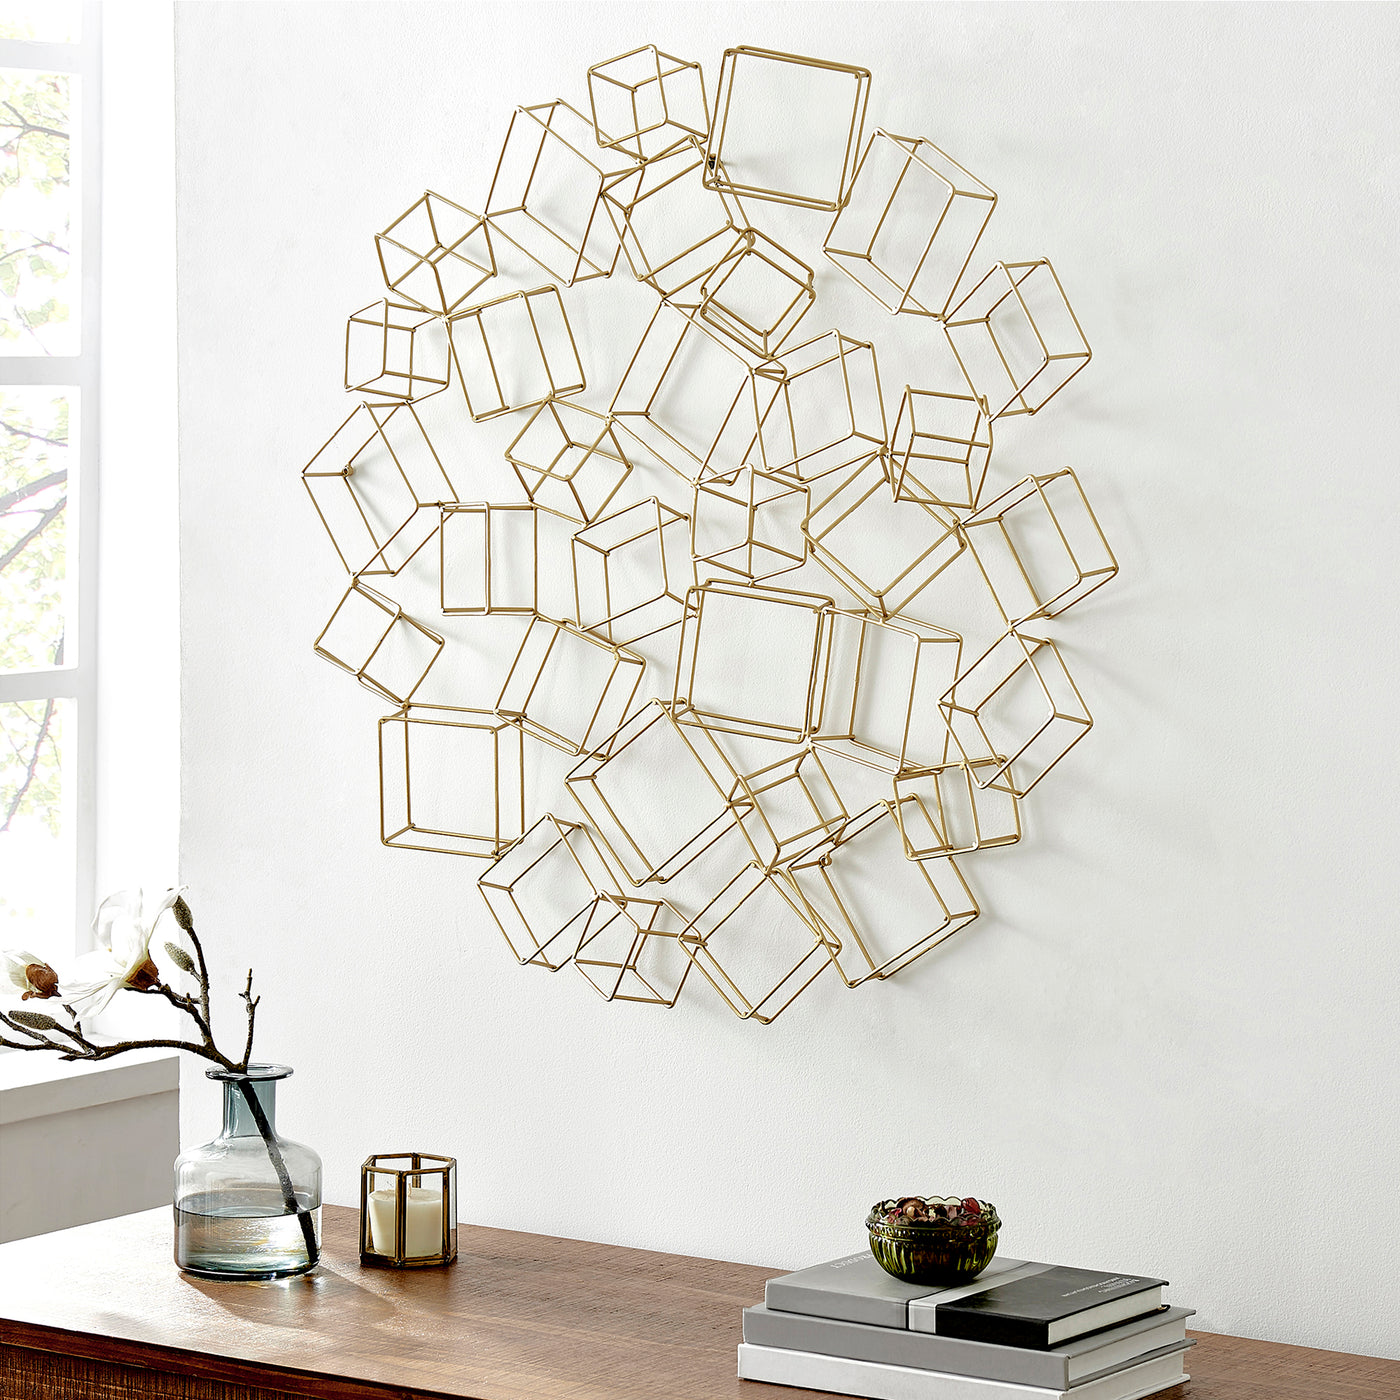 FirsTime & Co. Gold Giselle Cubes Wall Decor, Modern Style, Made of Metal